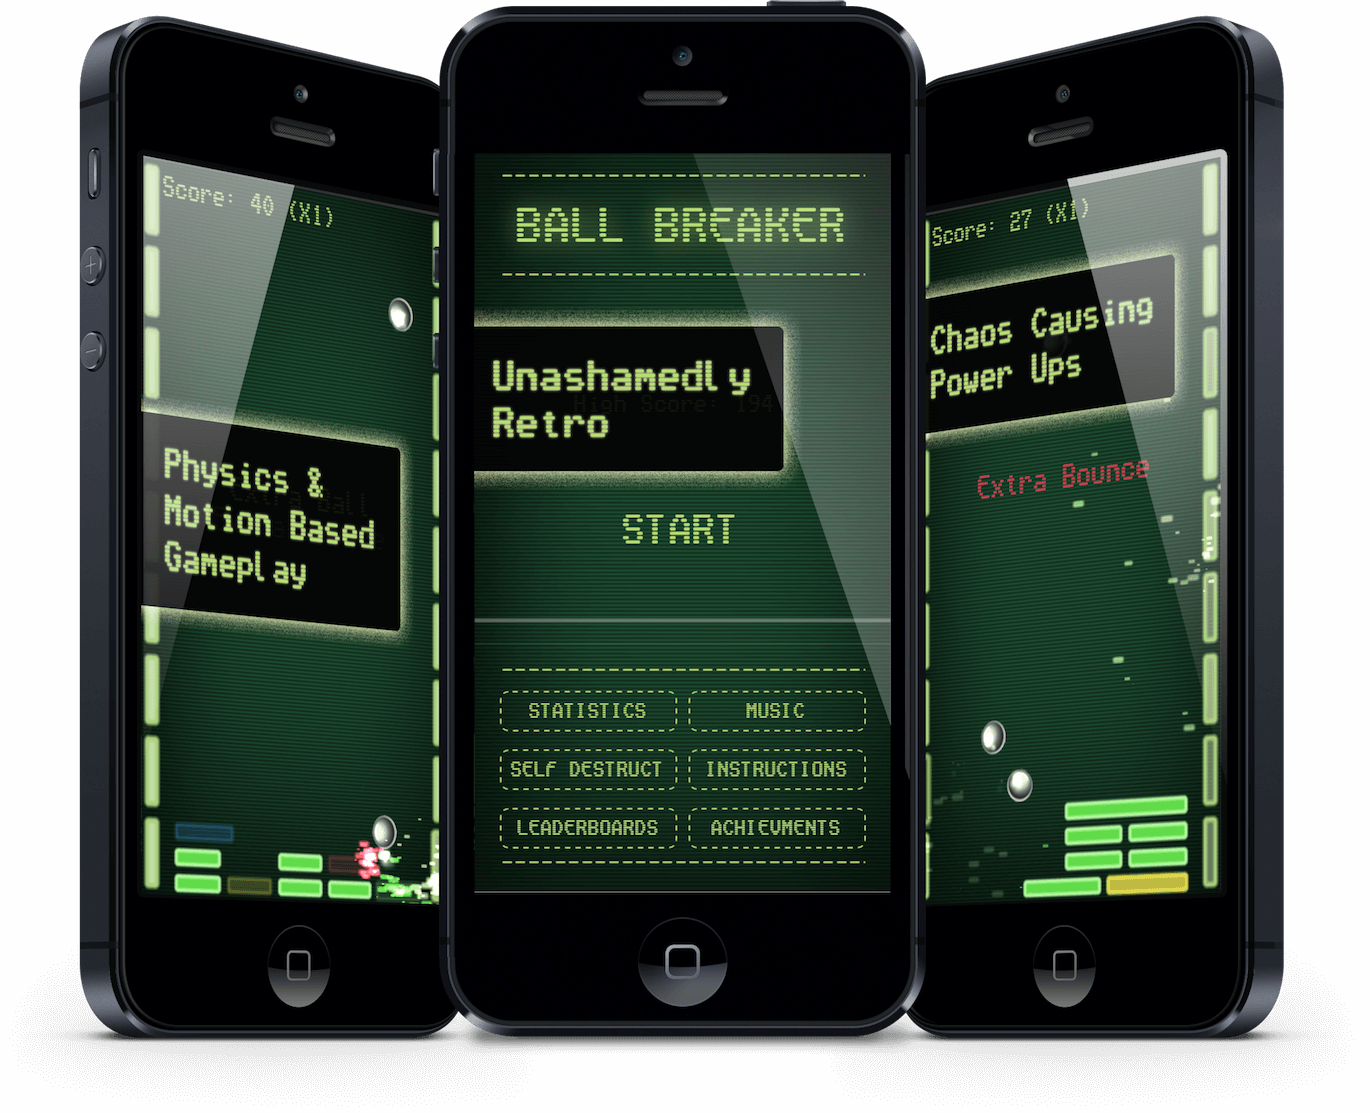 Ball Breaker iOS app running on 3 iPhone 5 devices, side by side on various screens